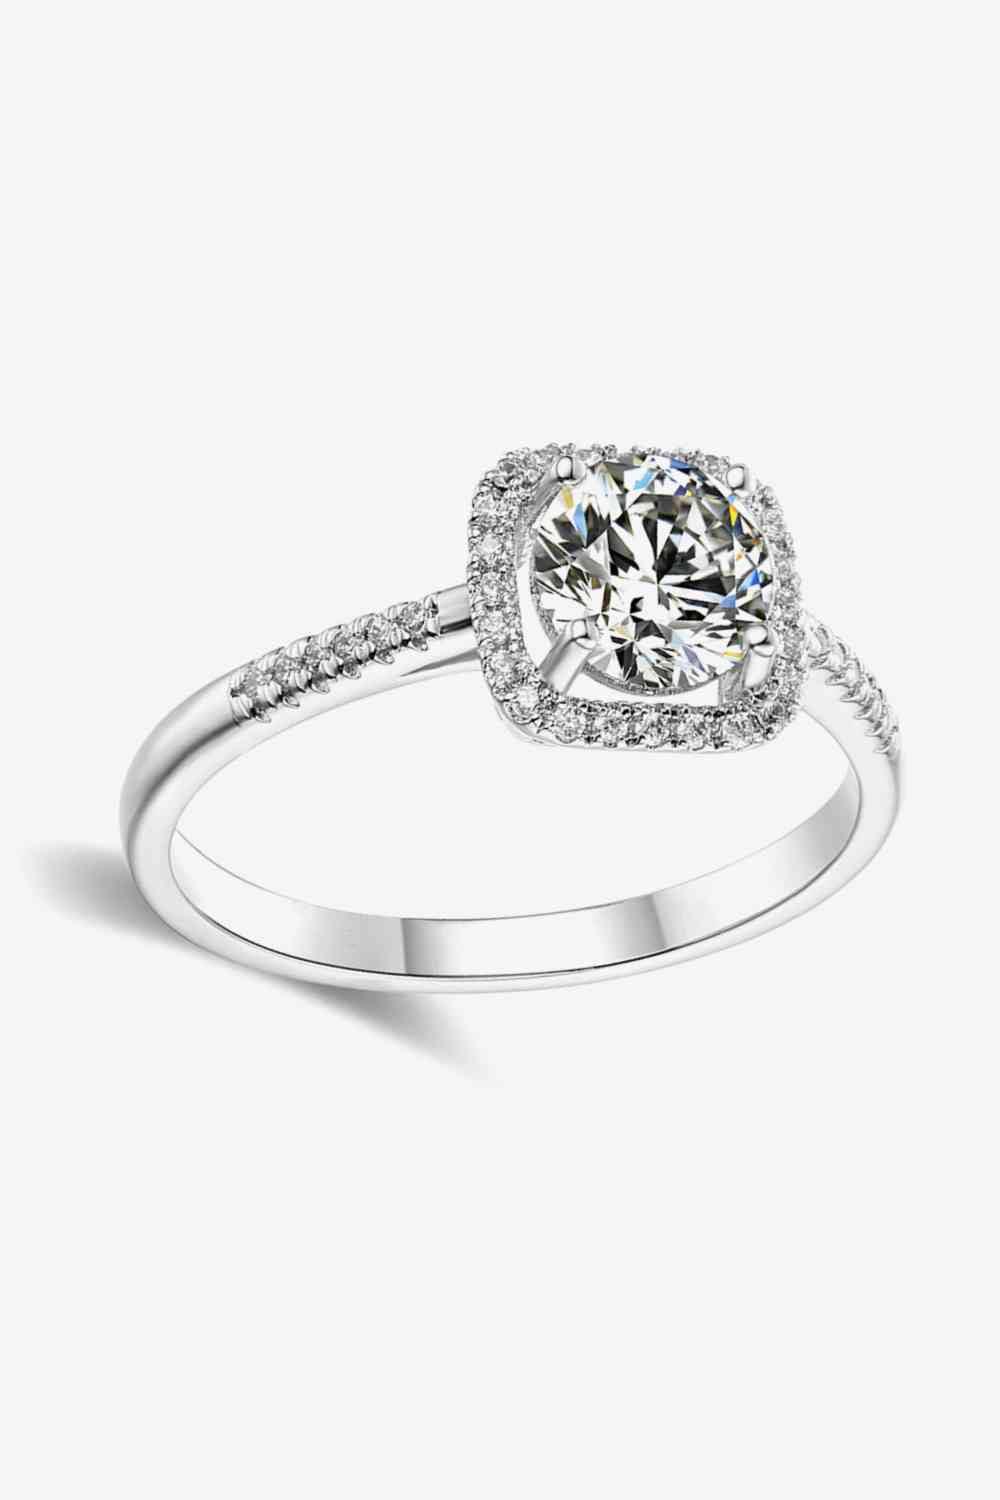 Daring Brilliance 1 Carat Moissanite Zircon Sterling Silver Ring - God's Girl Gifts And Apparel